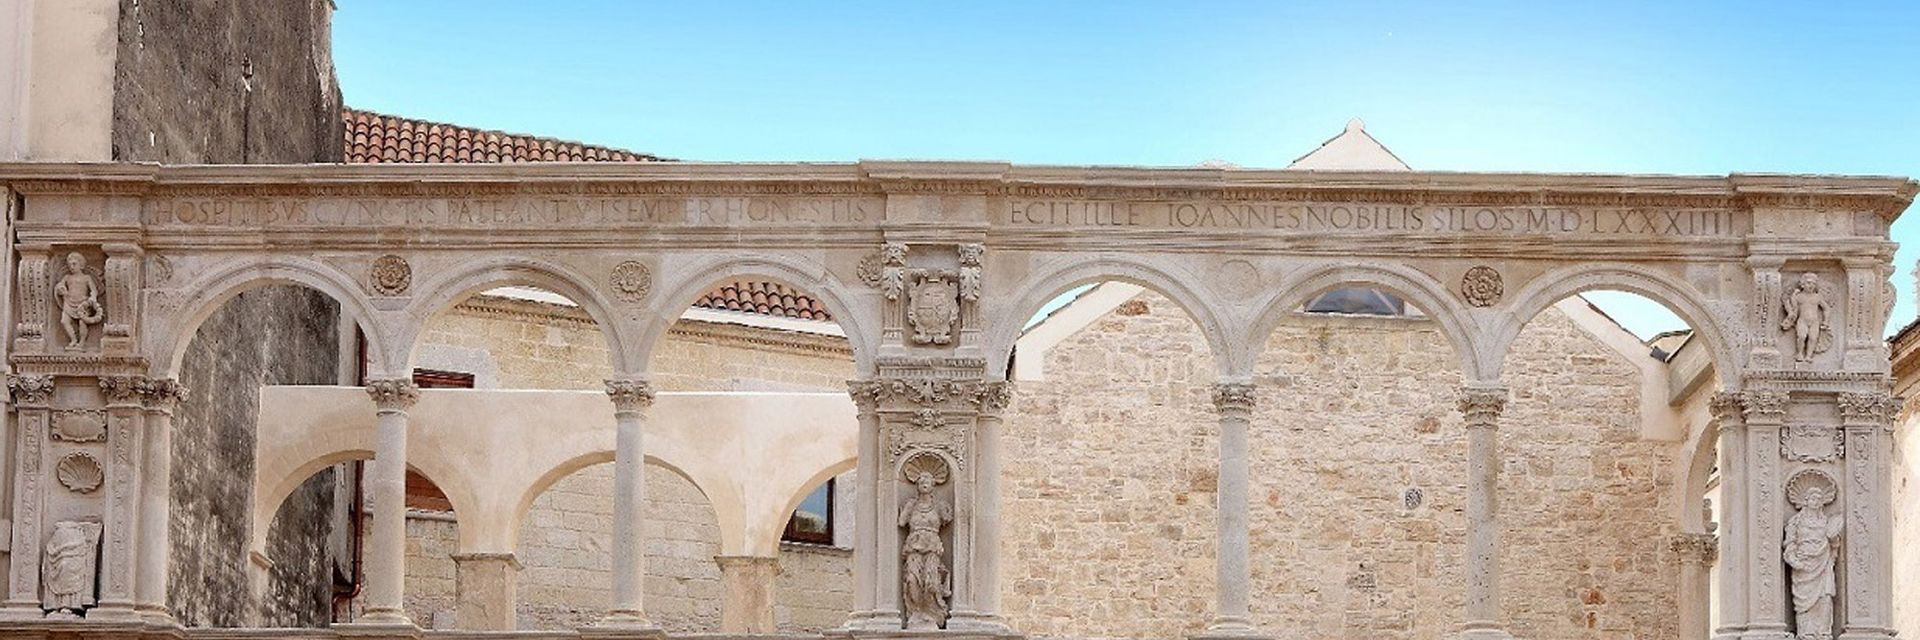 National Gallery of Puglia